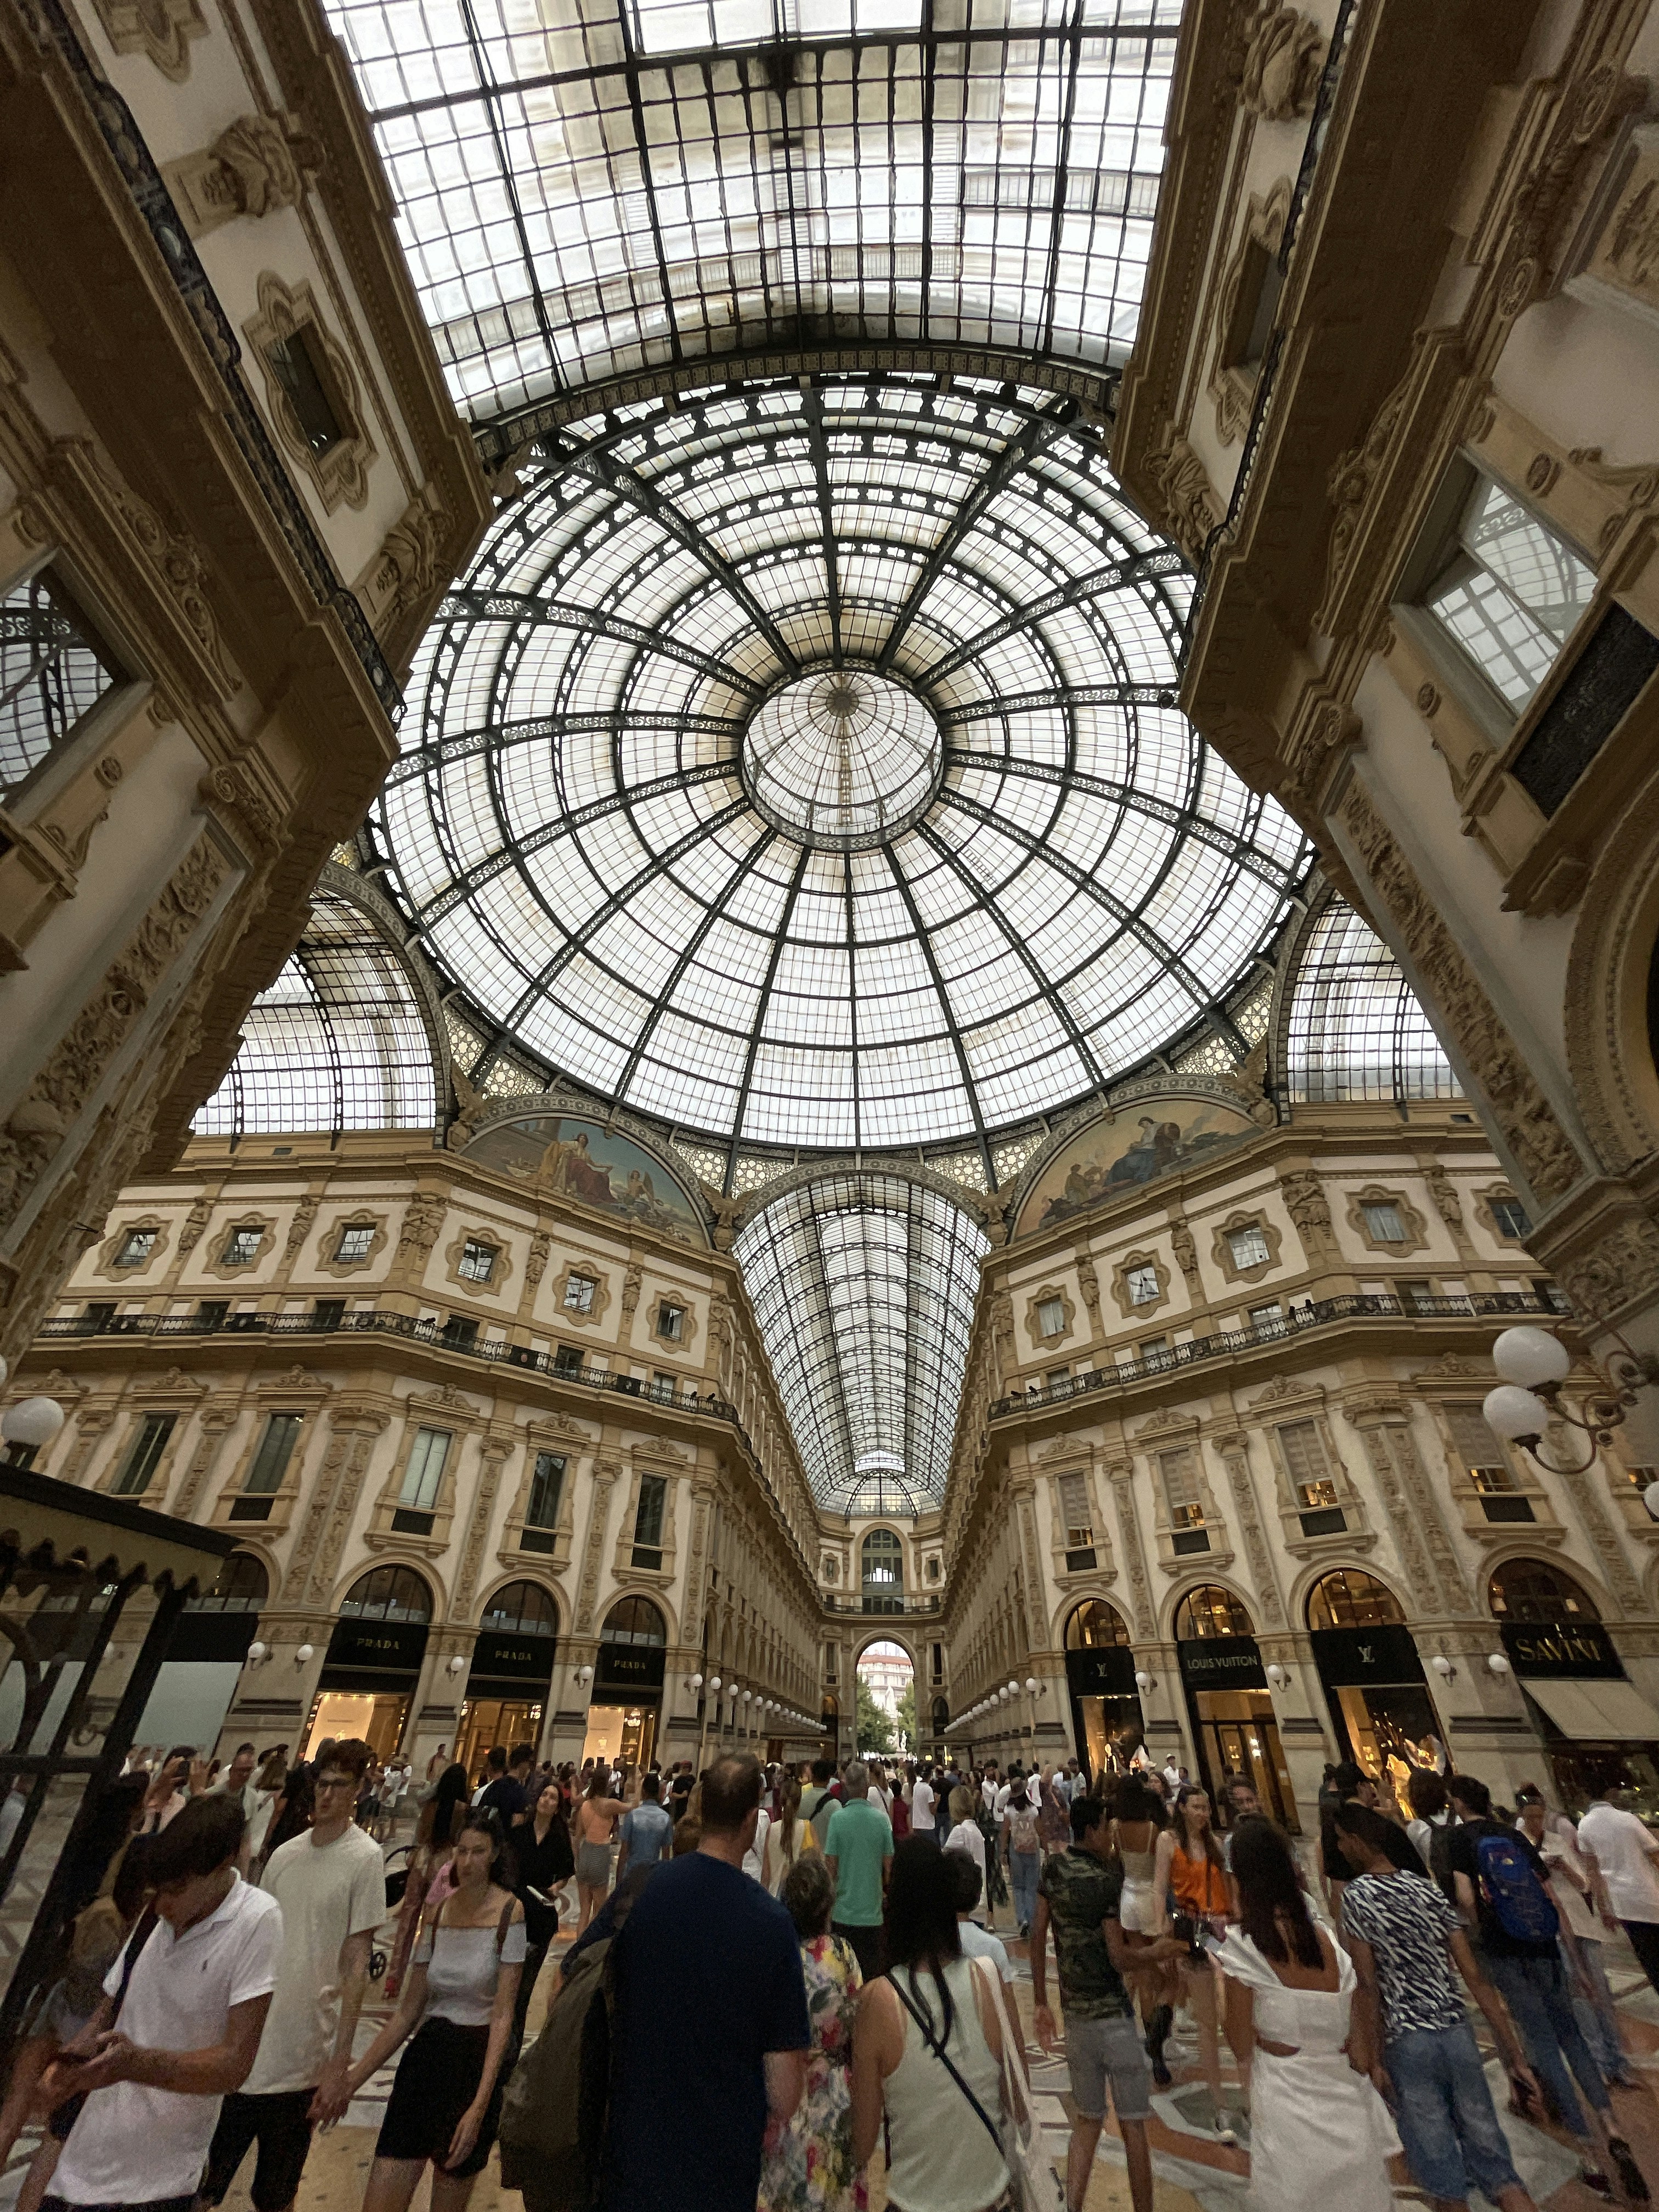 The central glass ceiling of the Galleria Vittorio Emanuele II shopping gallery in central Milan in Italy. The oldest in Italy, it was built between 1865 and 1877.